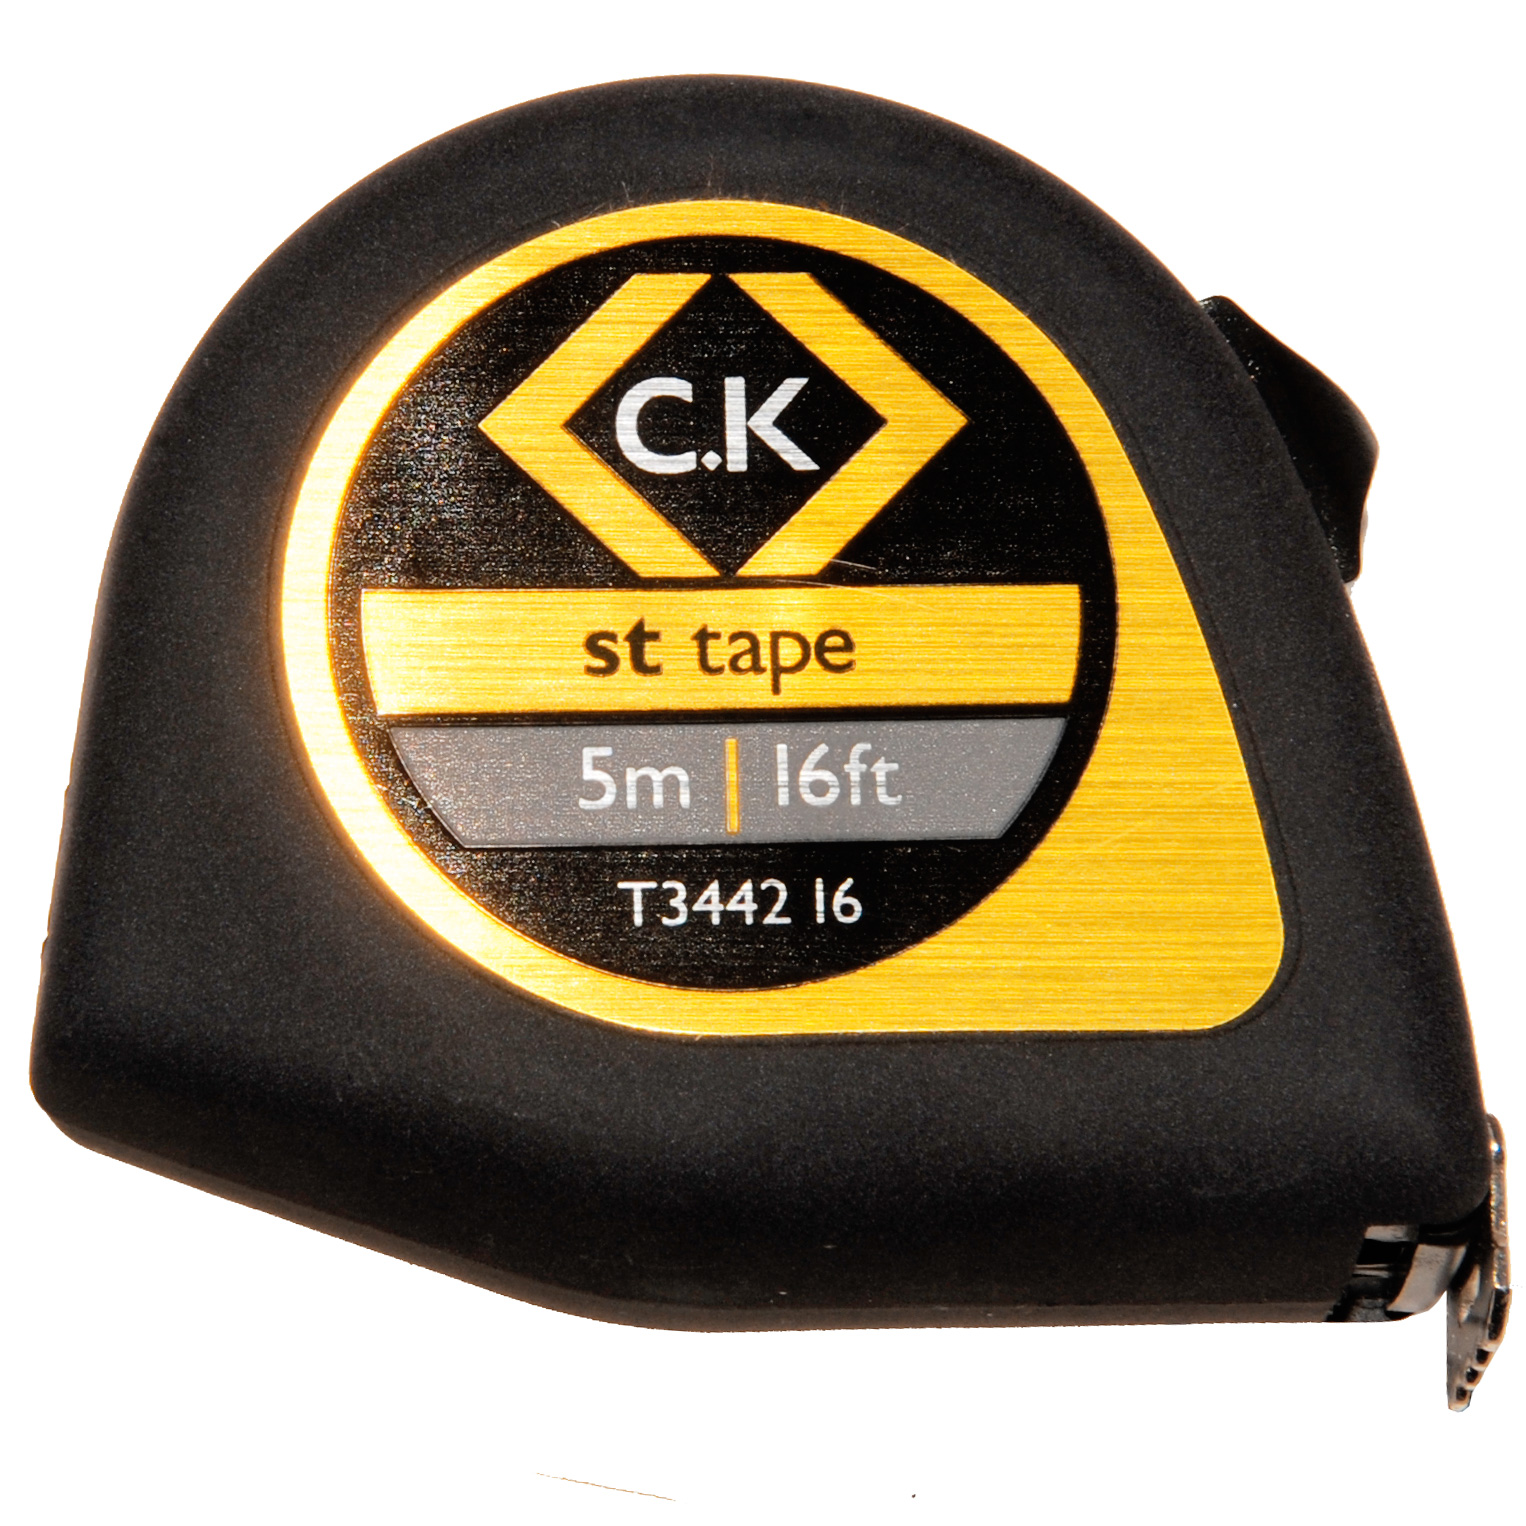 CK TOOLS T3442 16 TAPE MEASURE, SOFTECH,5M, 16FT